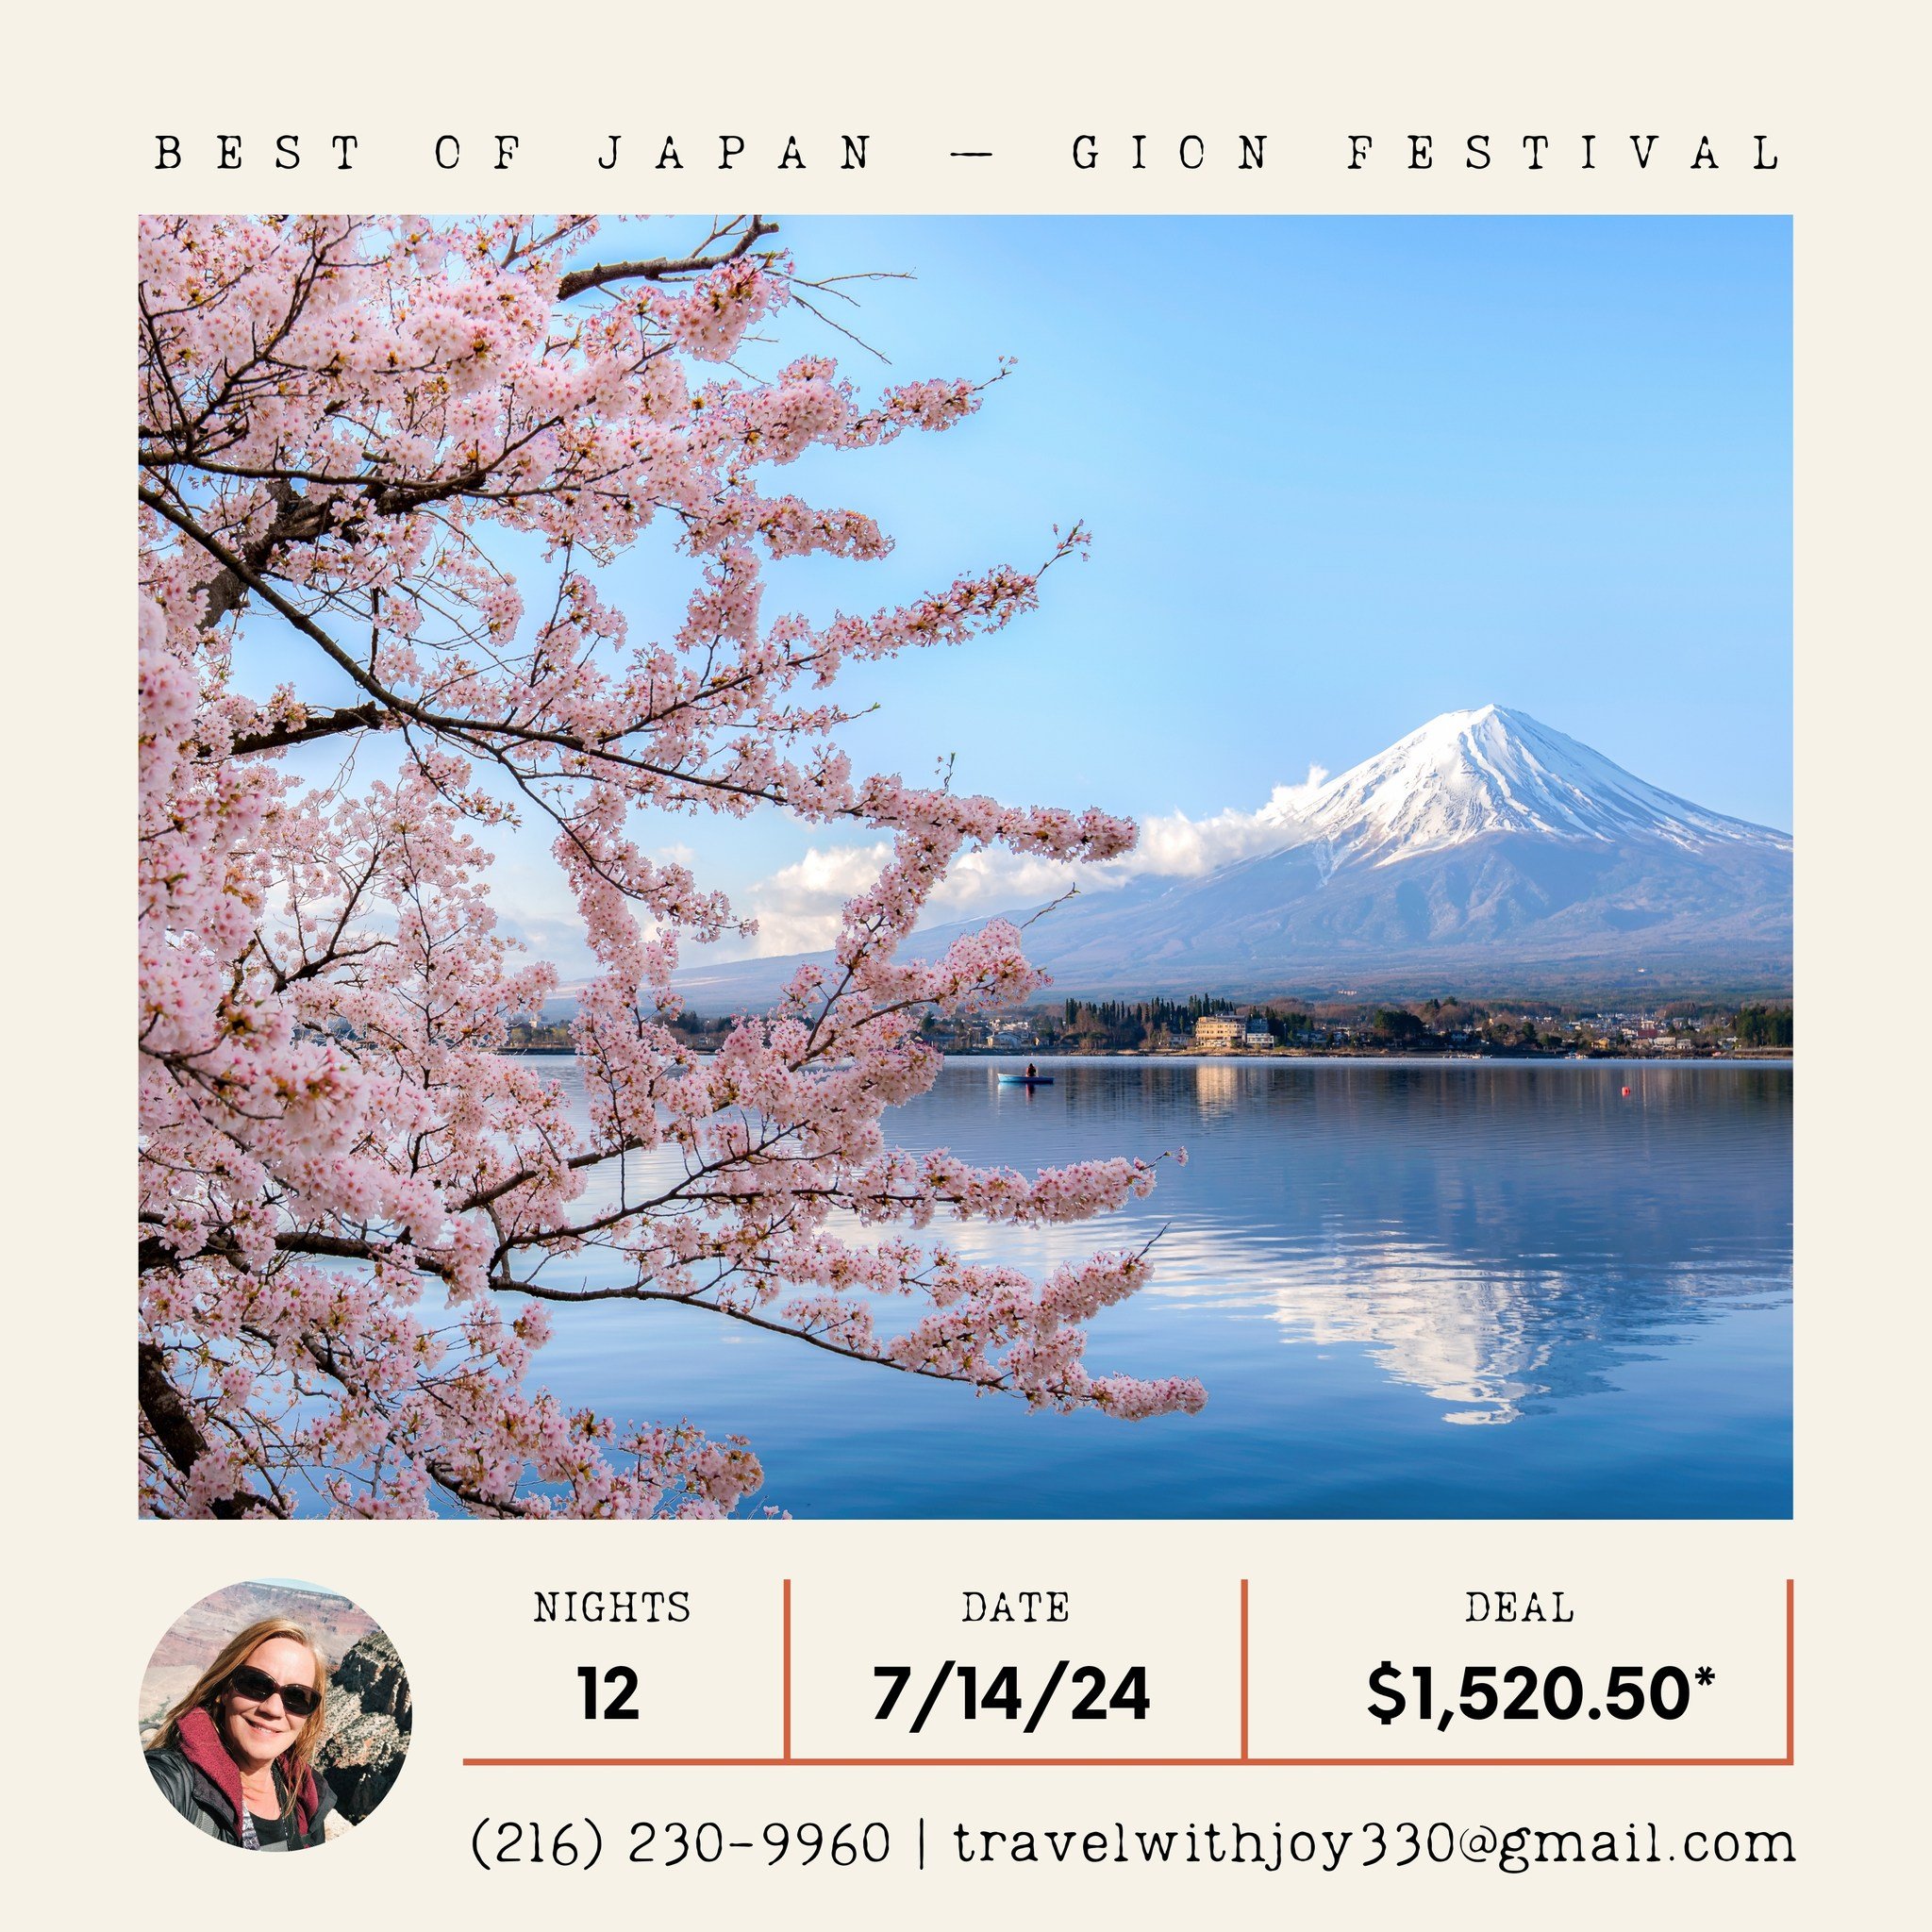 Sail to some of northeast Asia&rsquo;s most celebrated cities and explore the country&rsquo;s dazzling natural beauty. From mountains to beaches, exciting markets and fascinating museums, Celebrity brings you the best of Japan in these exciting itine